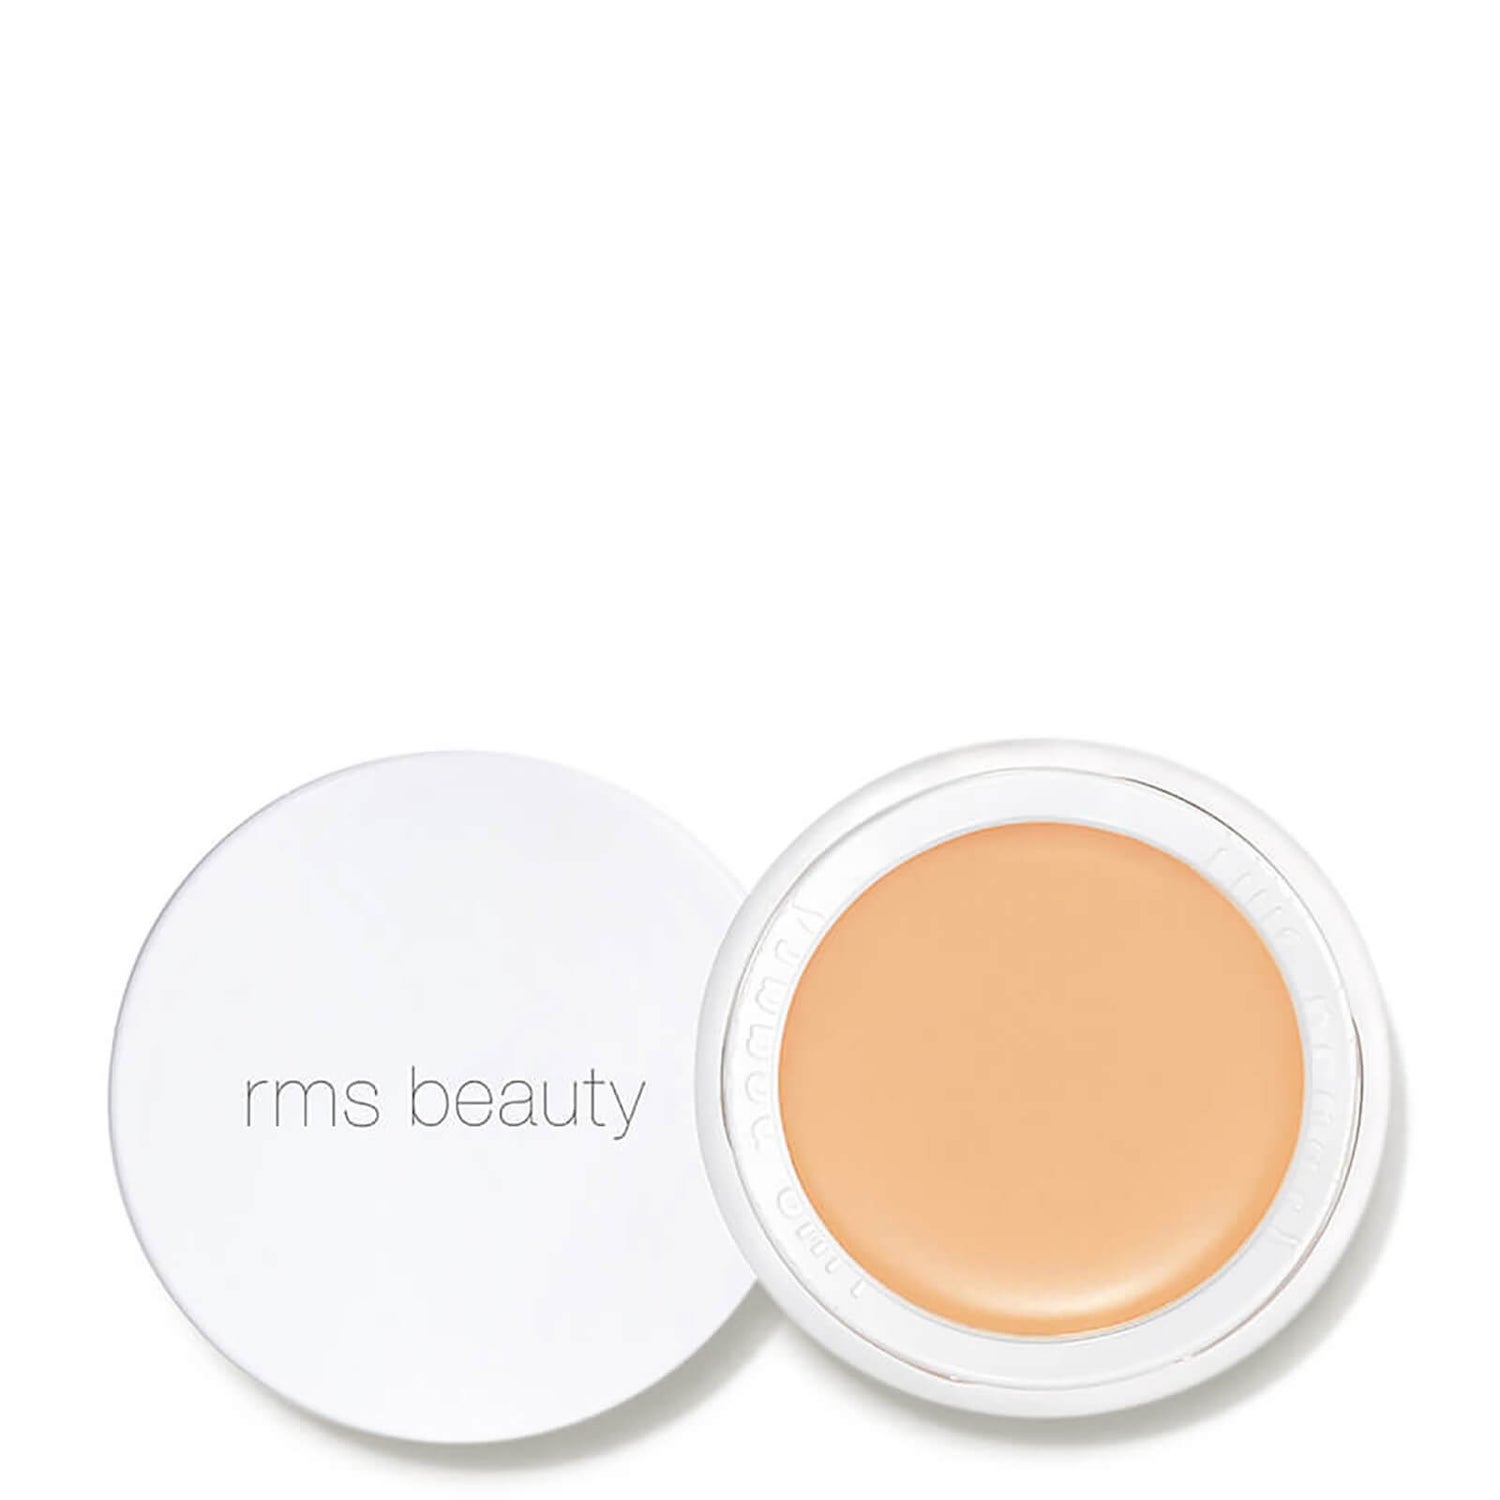 RMS Beauty 'Un' Cover-Up correttore